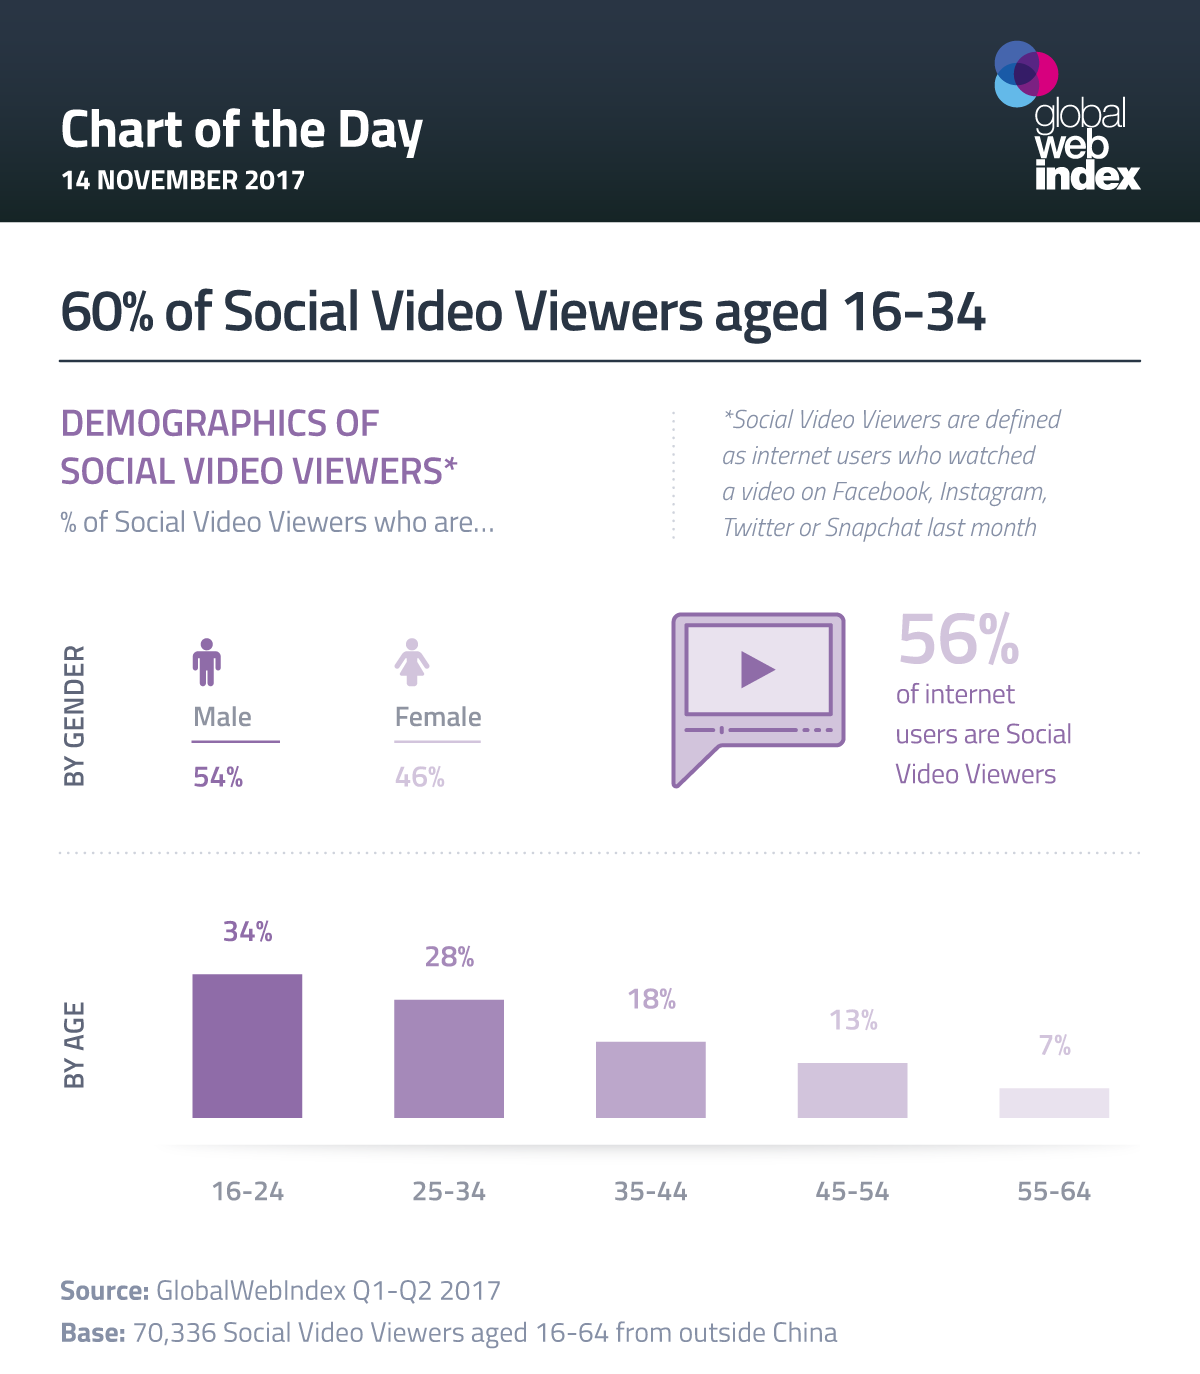 60% of Social Video Viewers aged 16-34